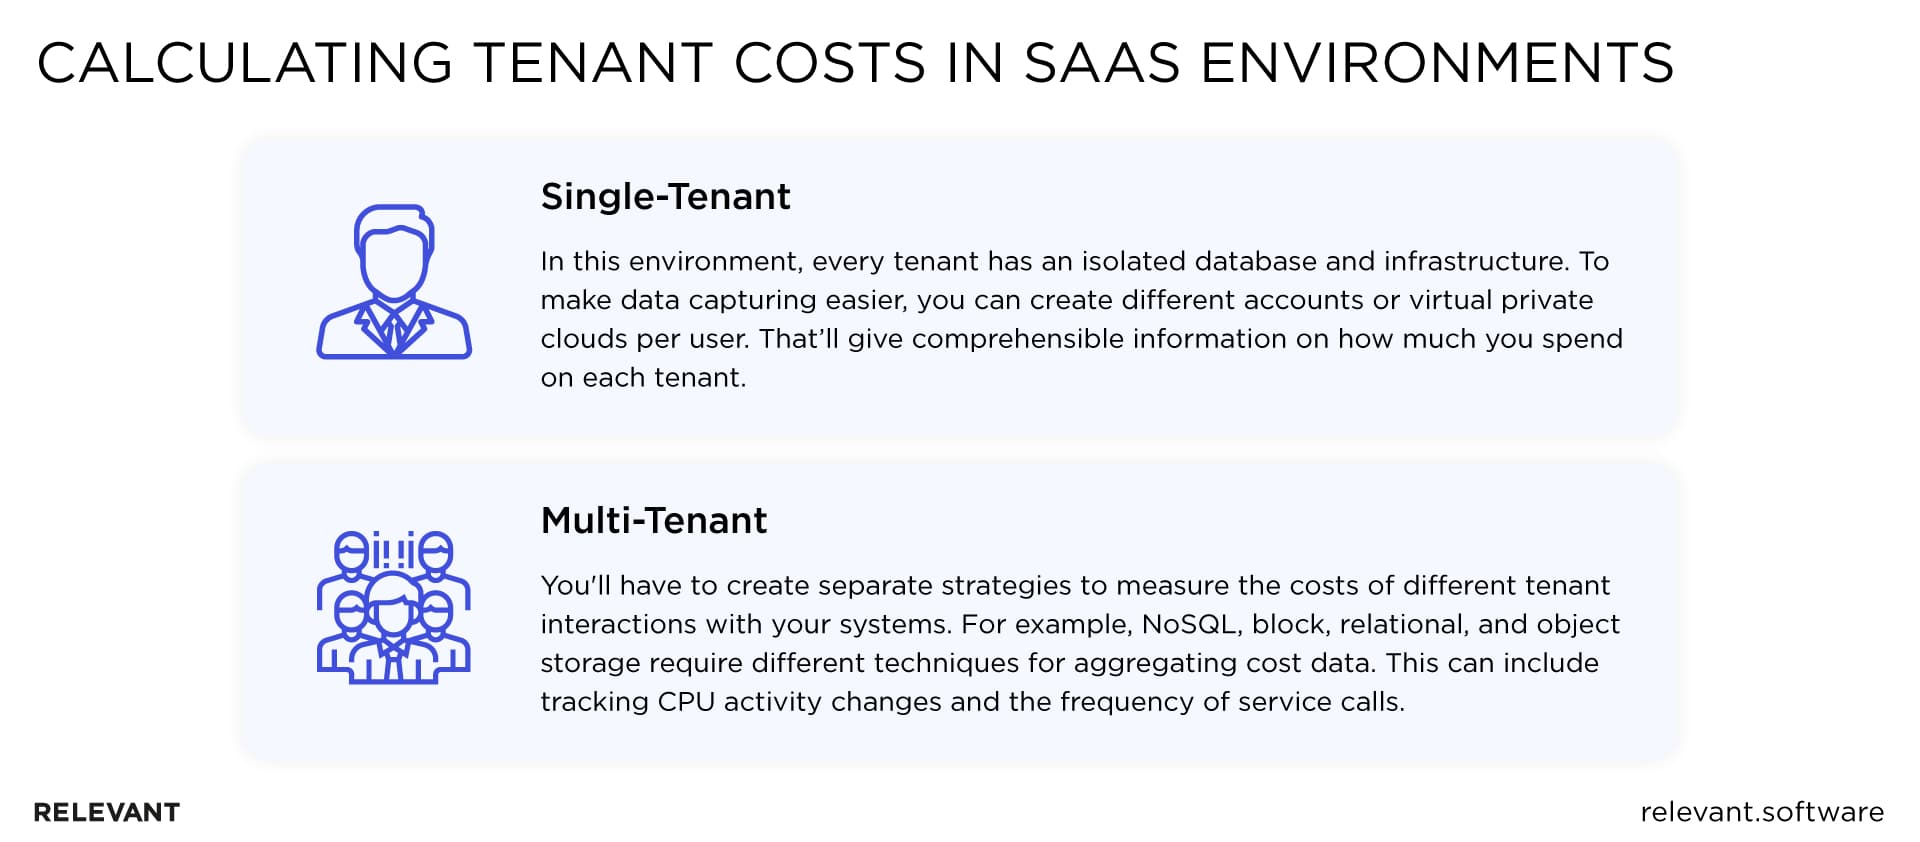 Calculating tenant costs in SaaS environments